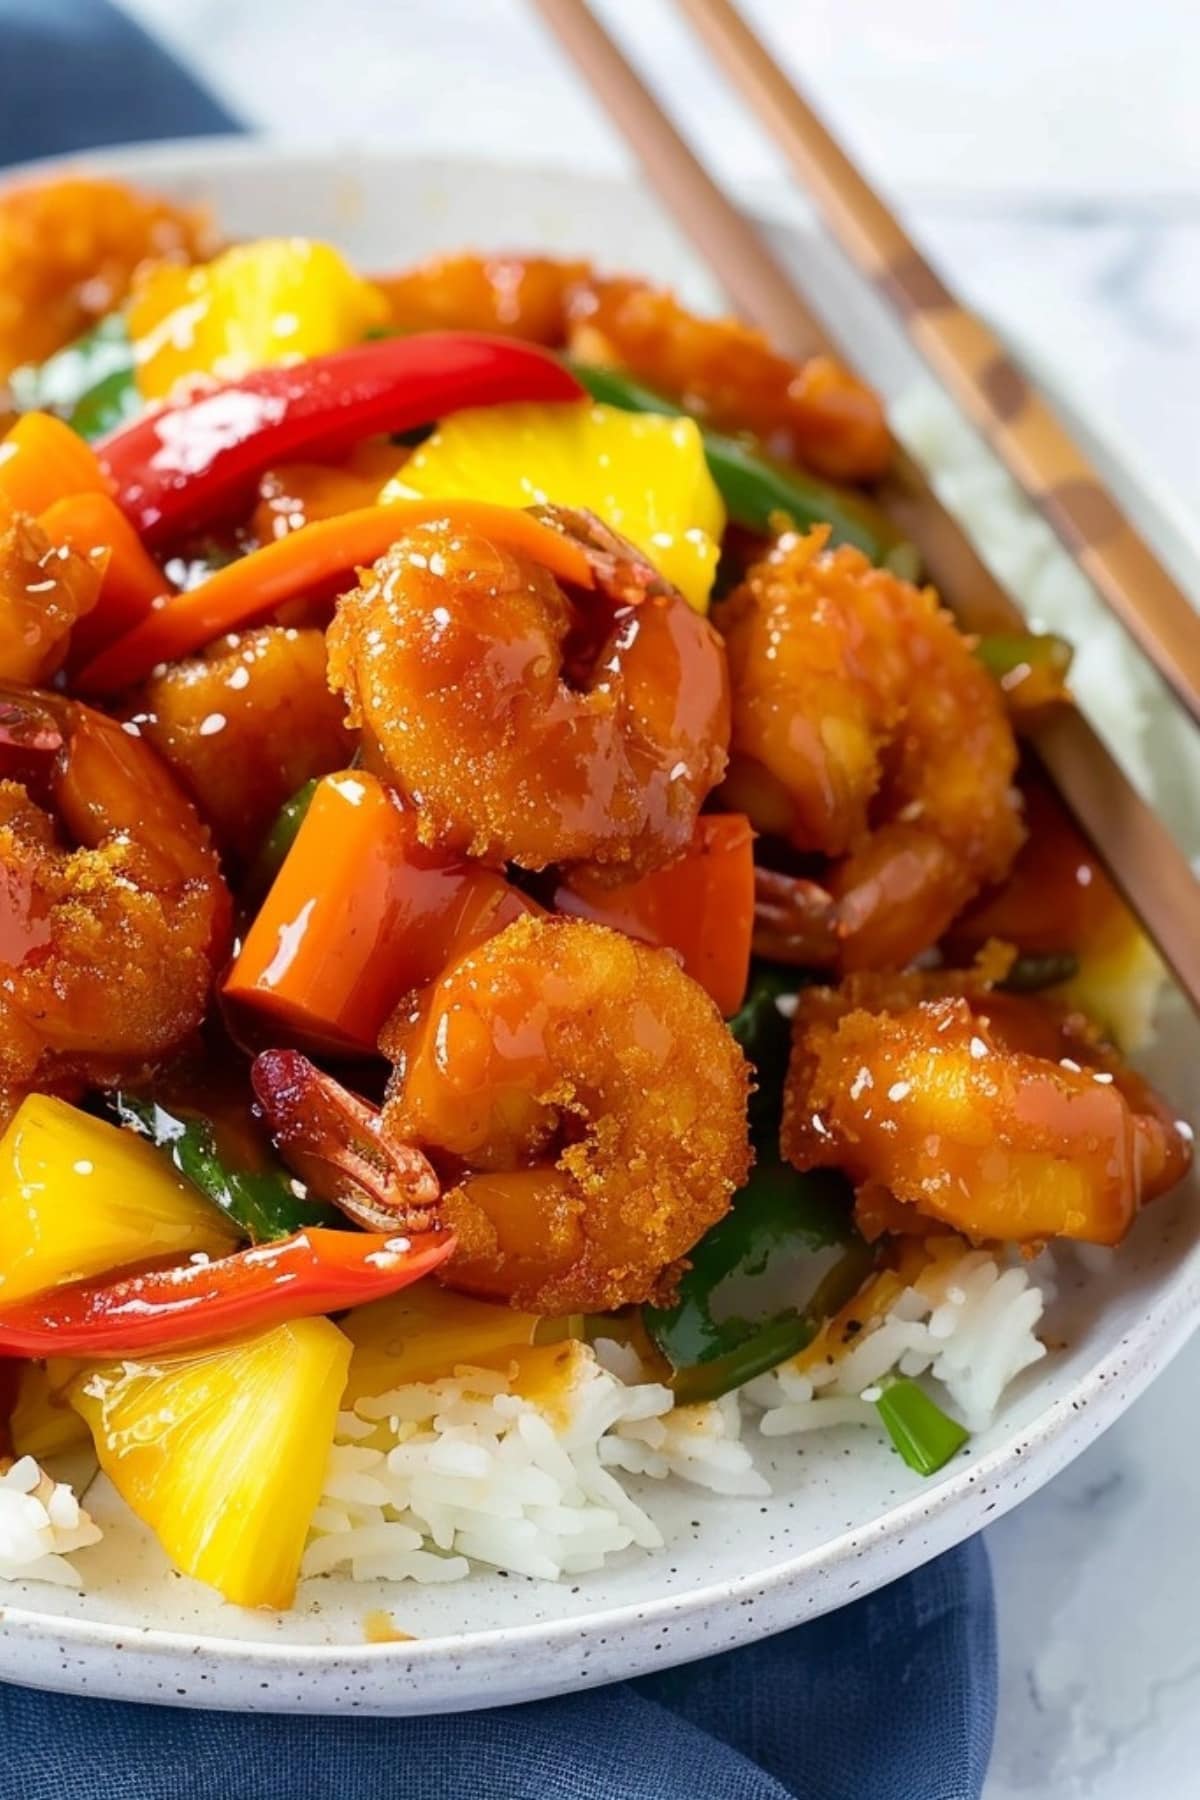 Sweet and sour shrimp with carrots, bell pepper, pineapple chunks served with rice.